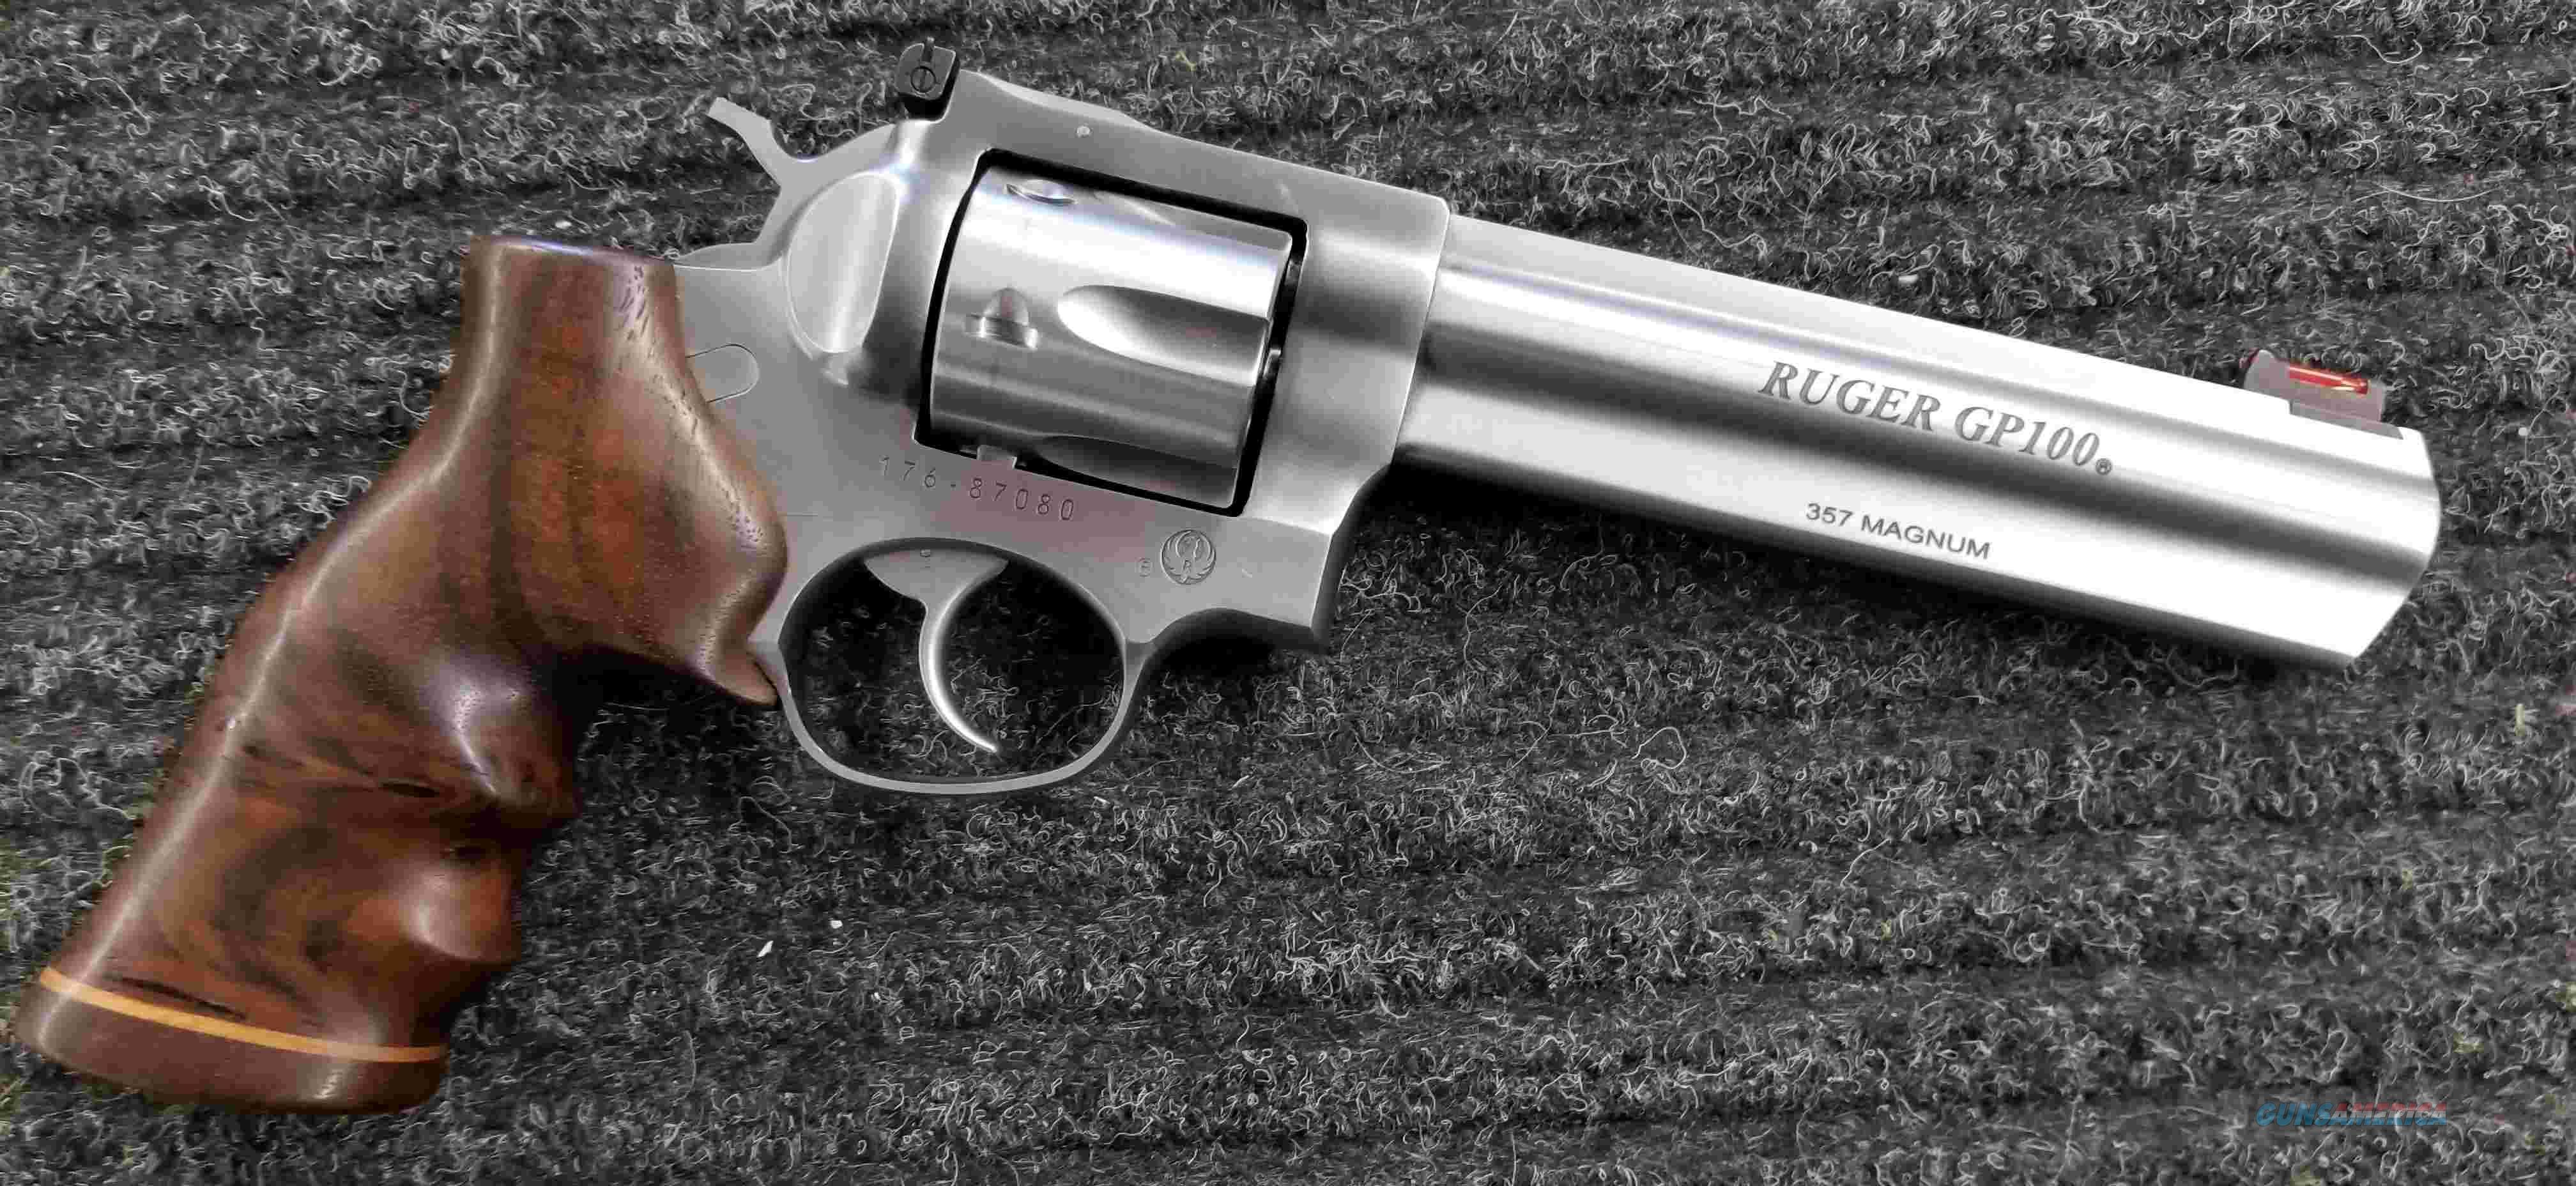 Ruger Gp100 Stainless 357 Magnum Custom G For Sale